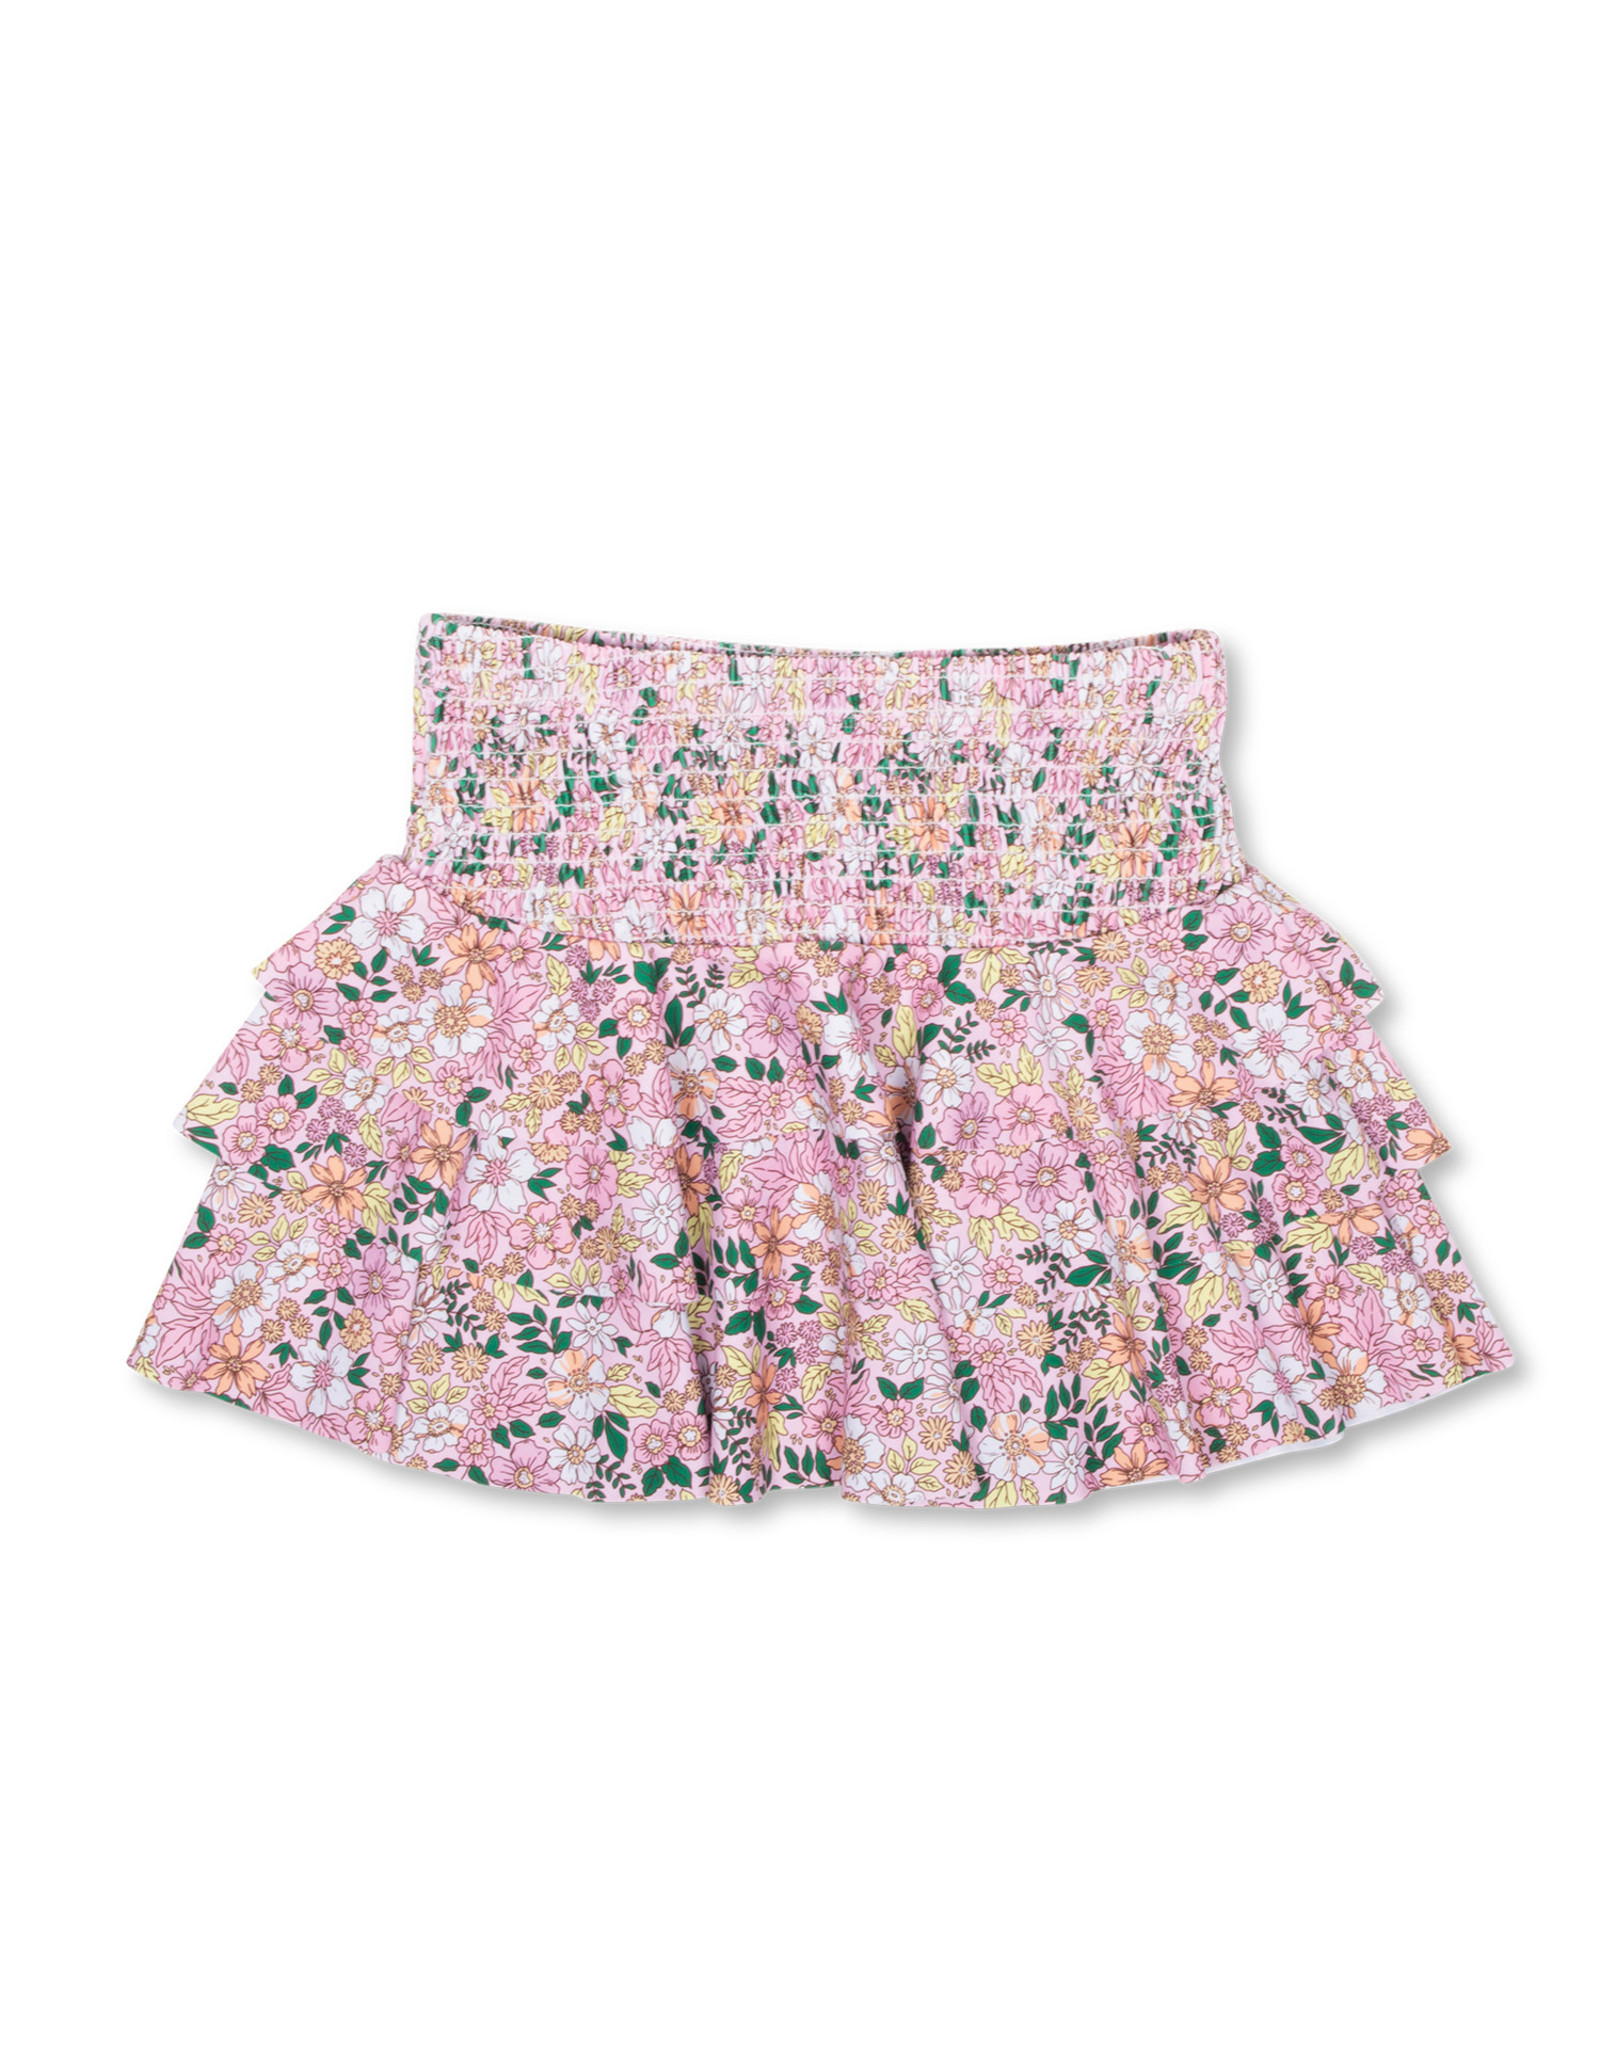 shade critters SC Girls Smocked Floral Ruffle Skirt